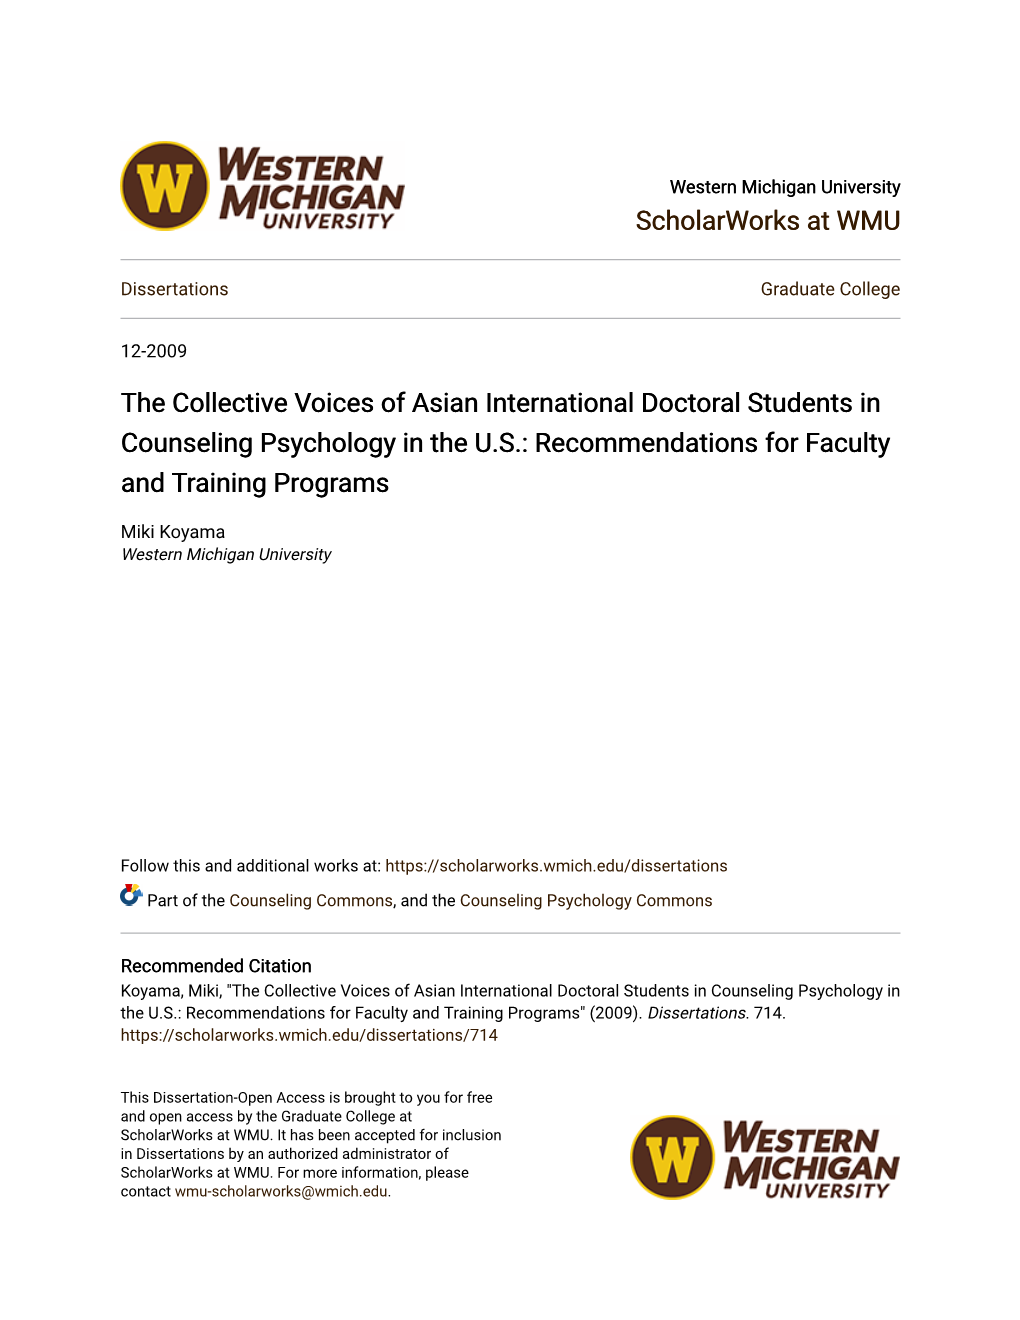 The Collective Voices of Asian International Doctoral Students in Counseling Psychology in the U.S.: Recommendations for Faculty and Training Programs